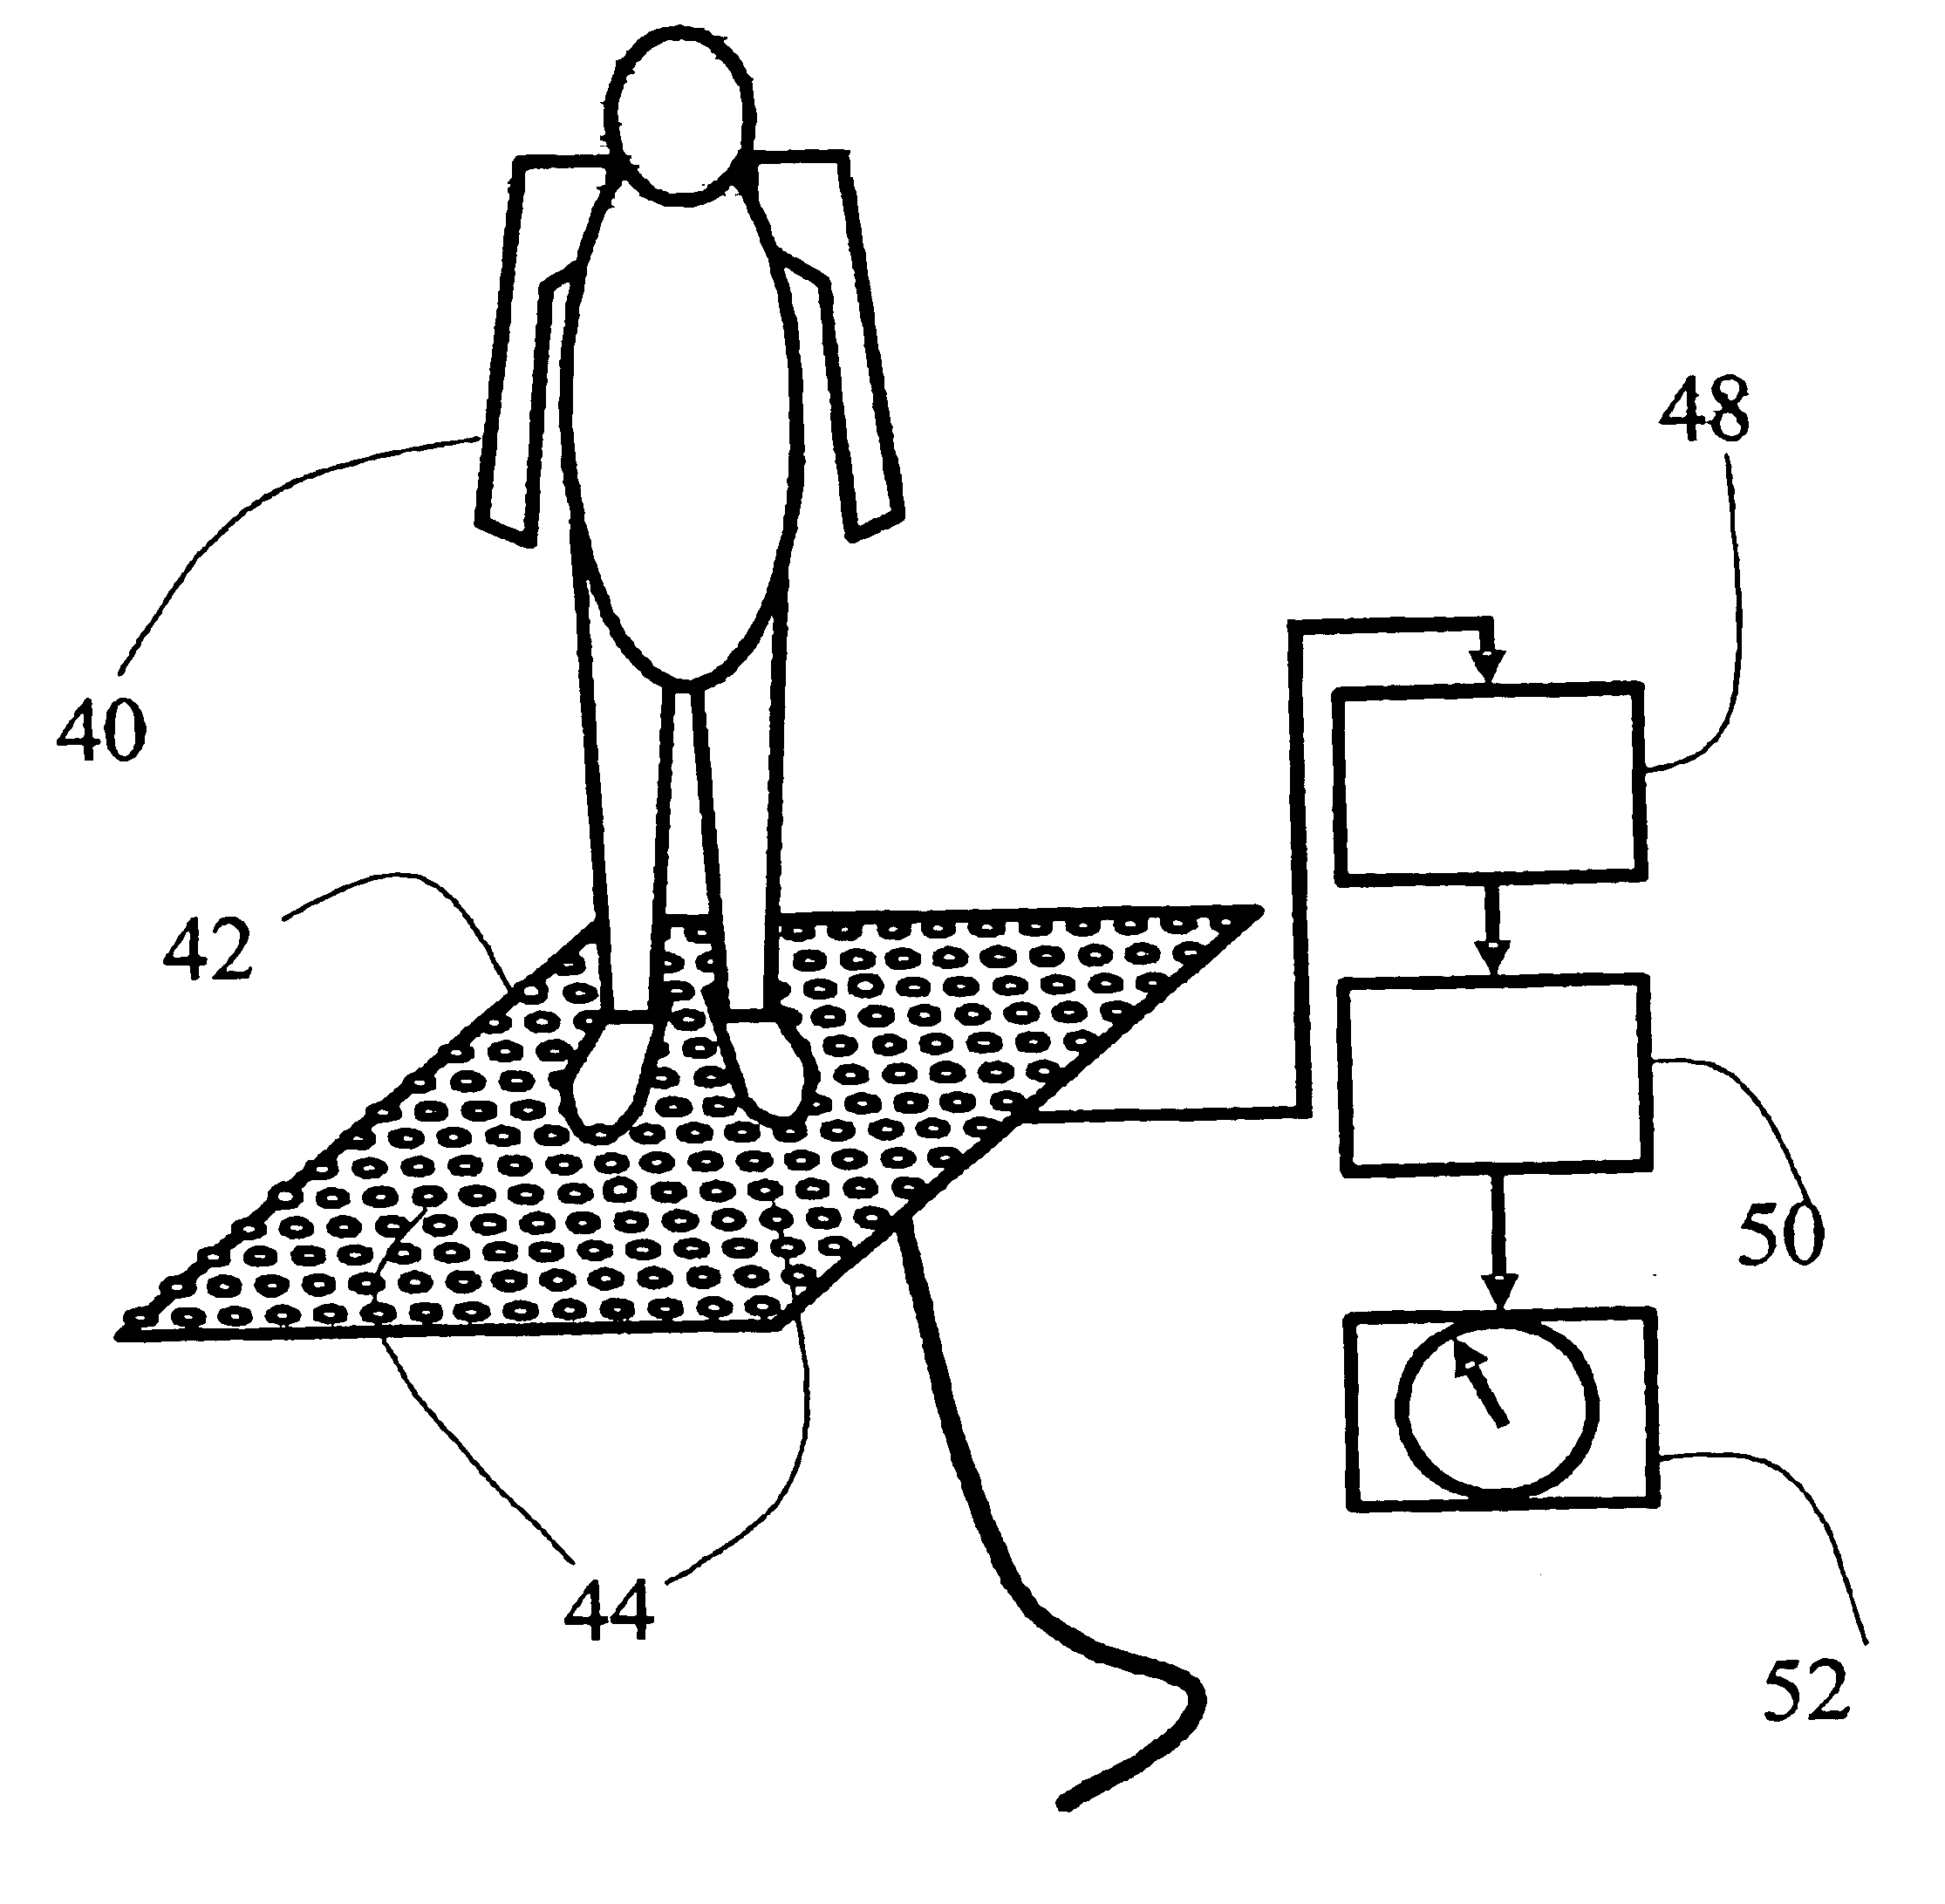 Detection of signs of attempted deception and other emotional stresses by detecting changes in weight distribution of a standing or sitting person